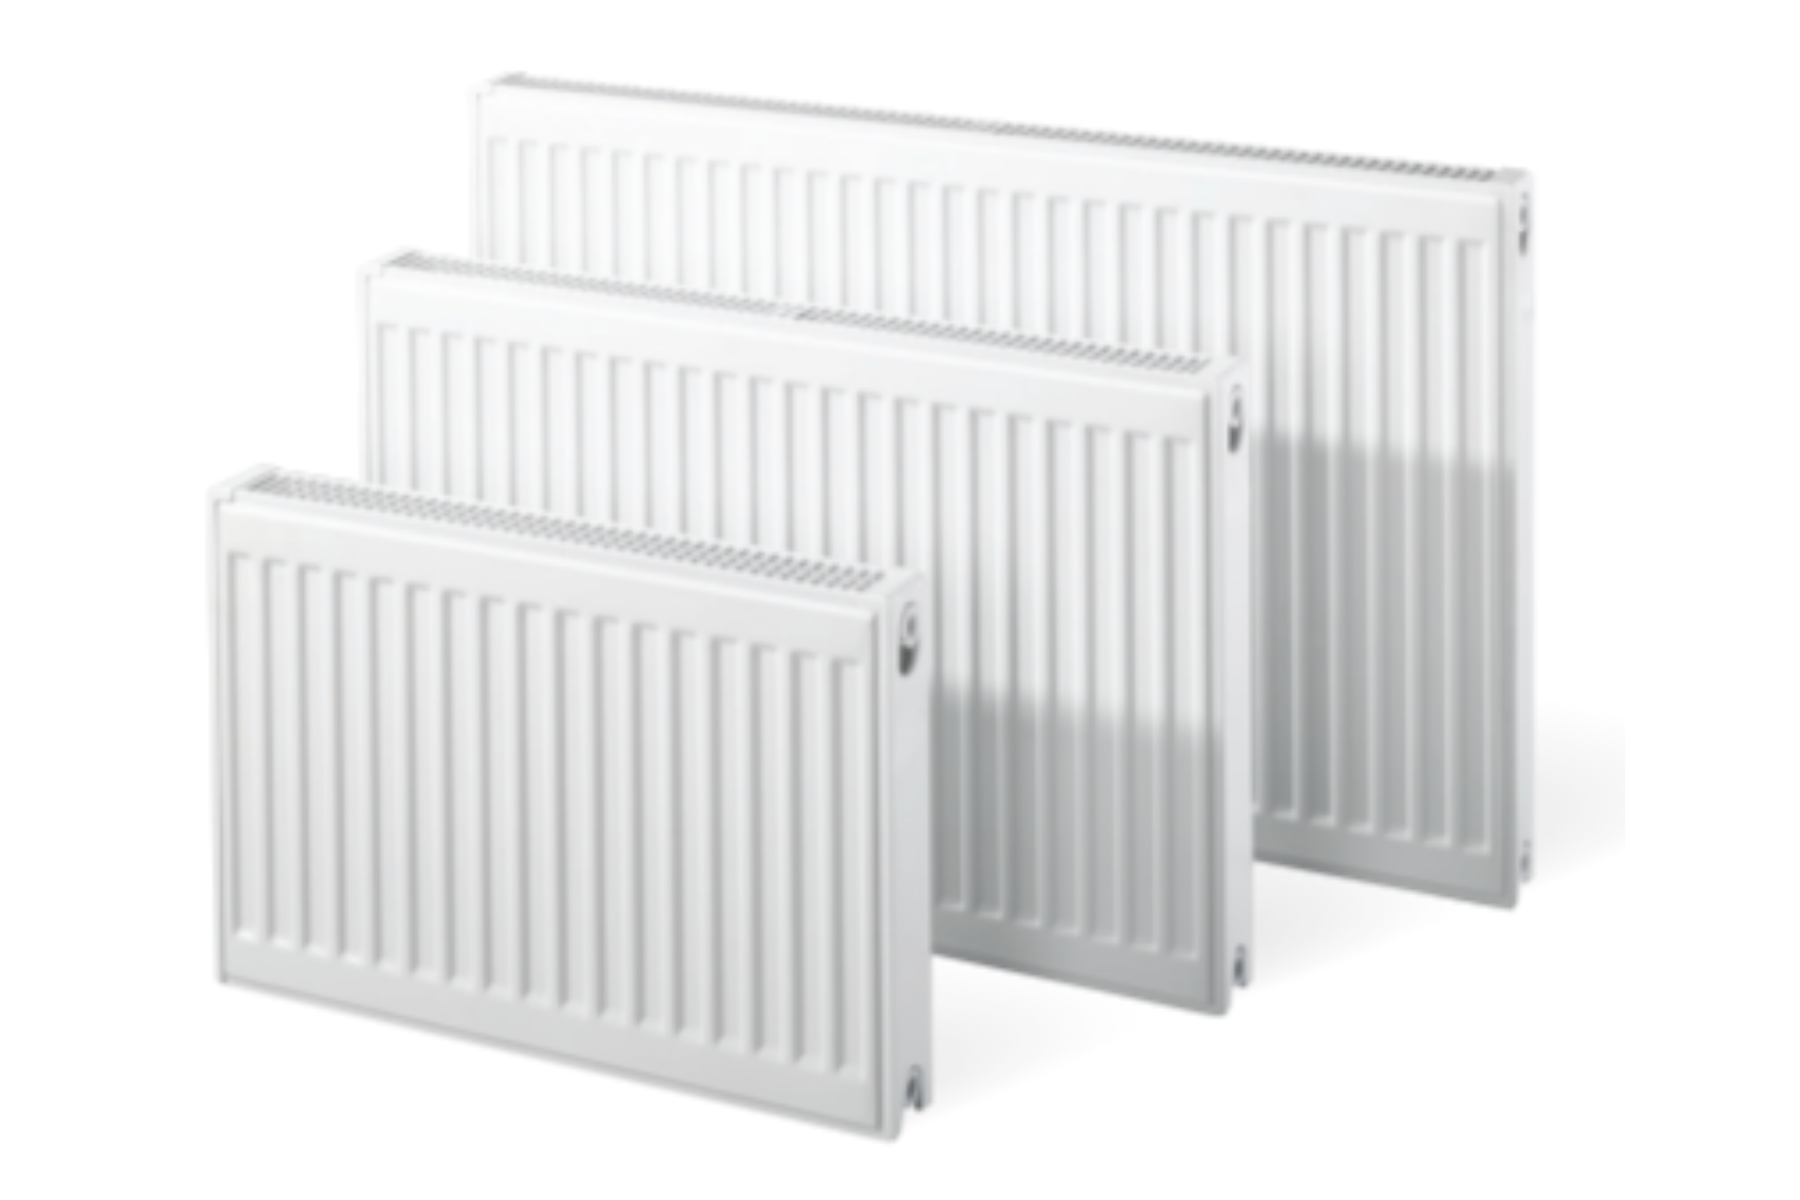 3 Convector Radiators Product Images